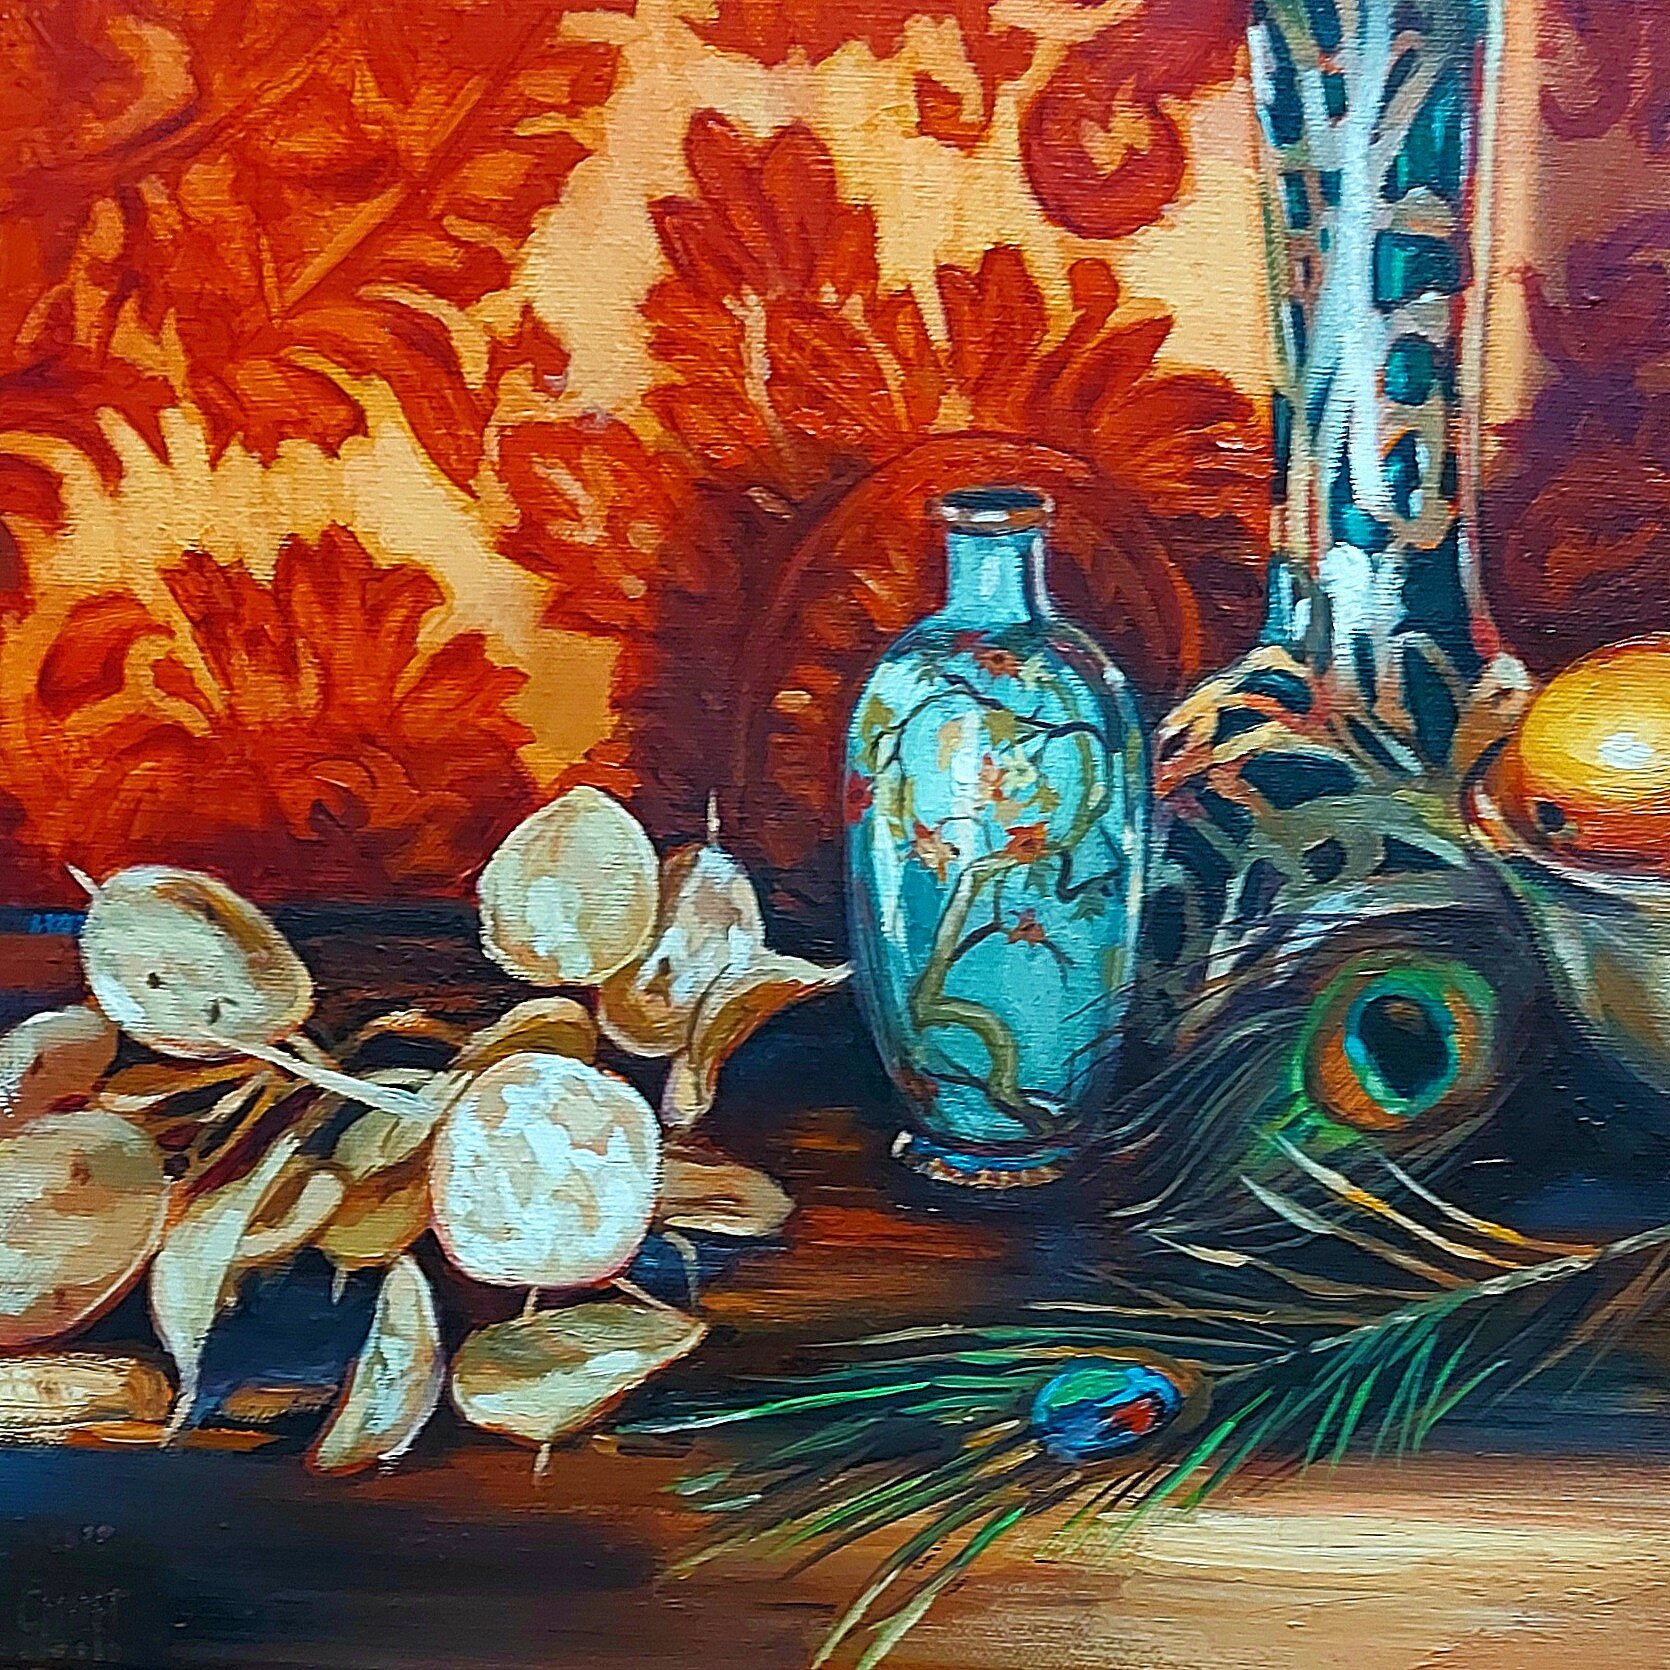 Vases and Feathers